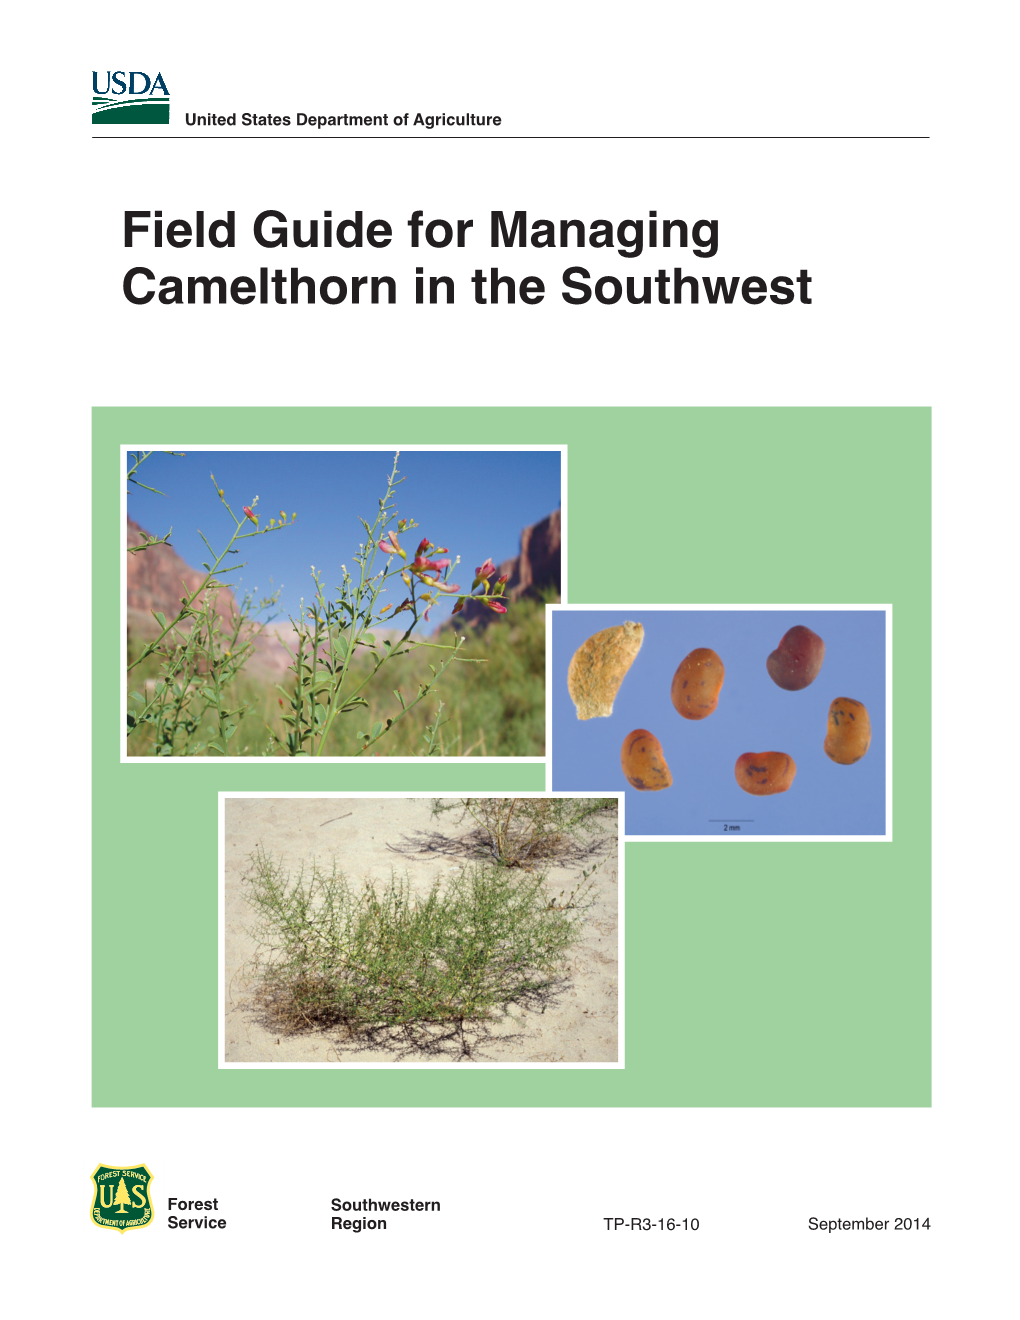 Managing Camelthorn in the Southwest